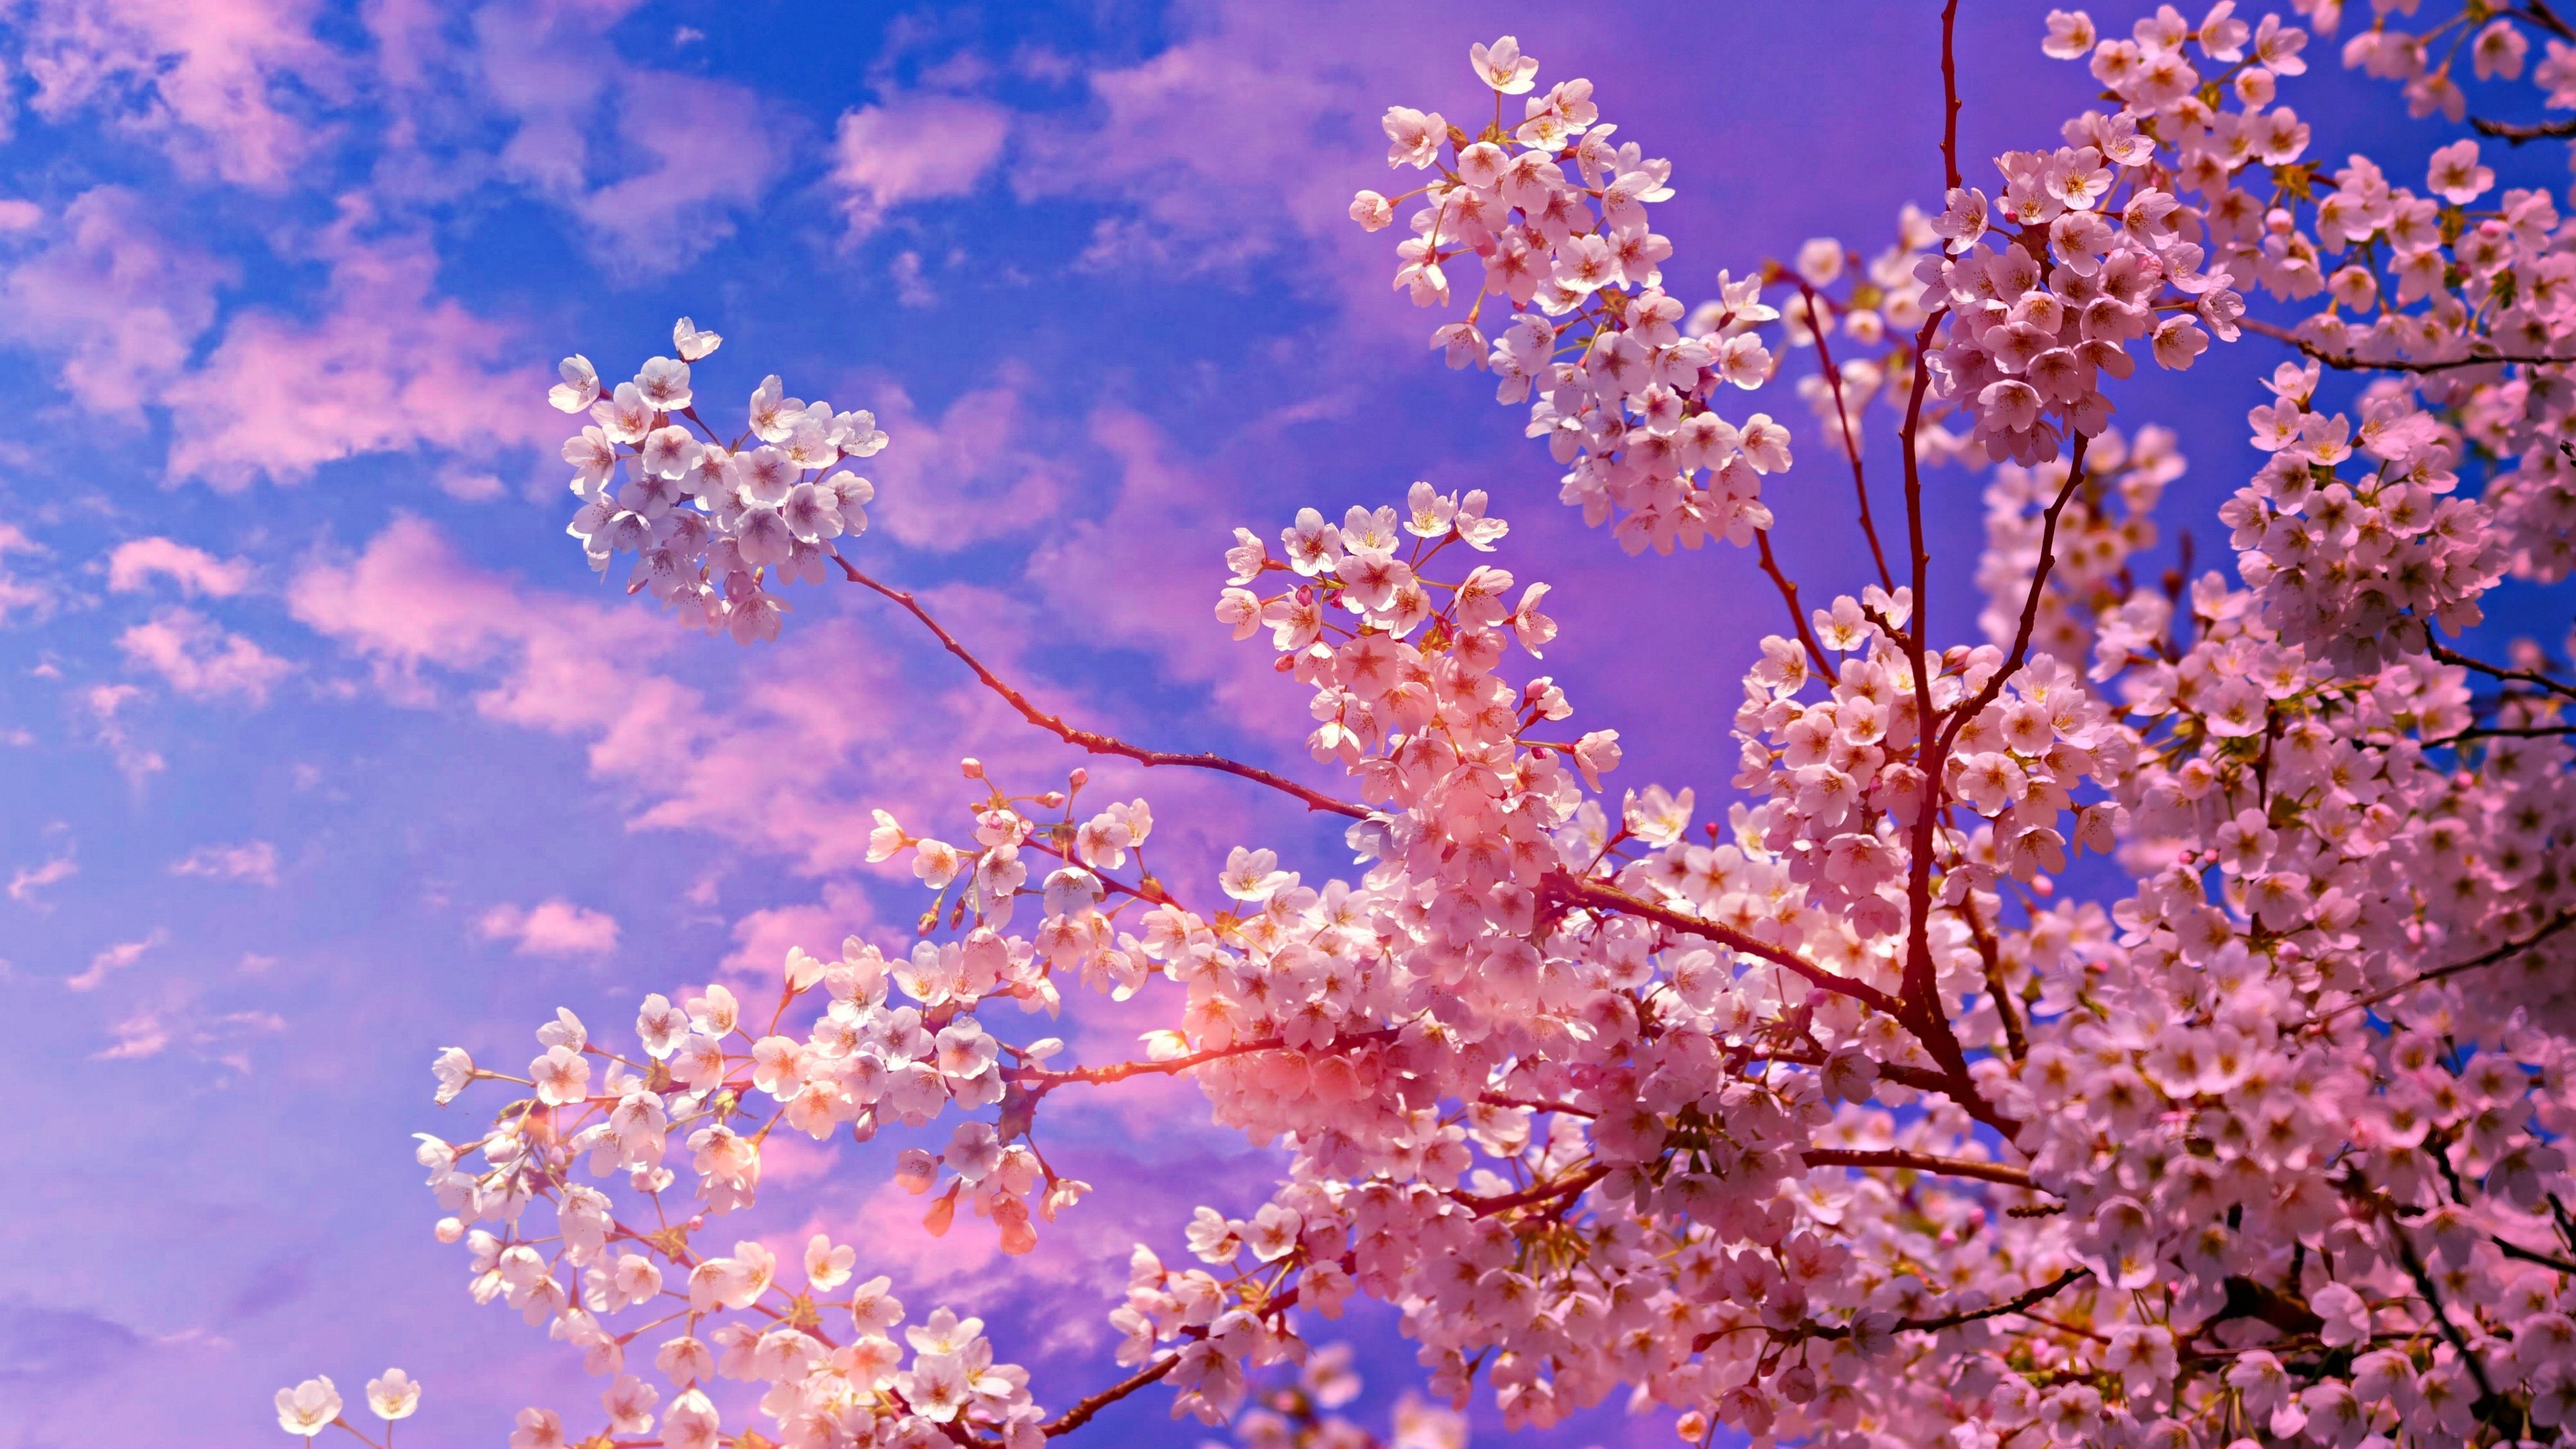 Cherry Blossom Tree 4k 5k 4k HD 4k Wallpaper, Image, Background, Photo and Picture